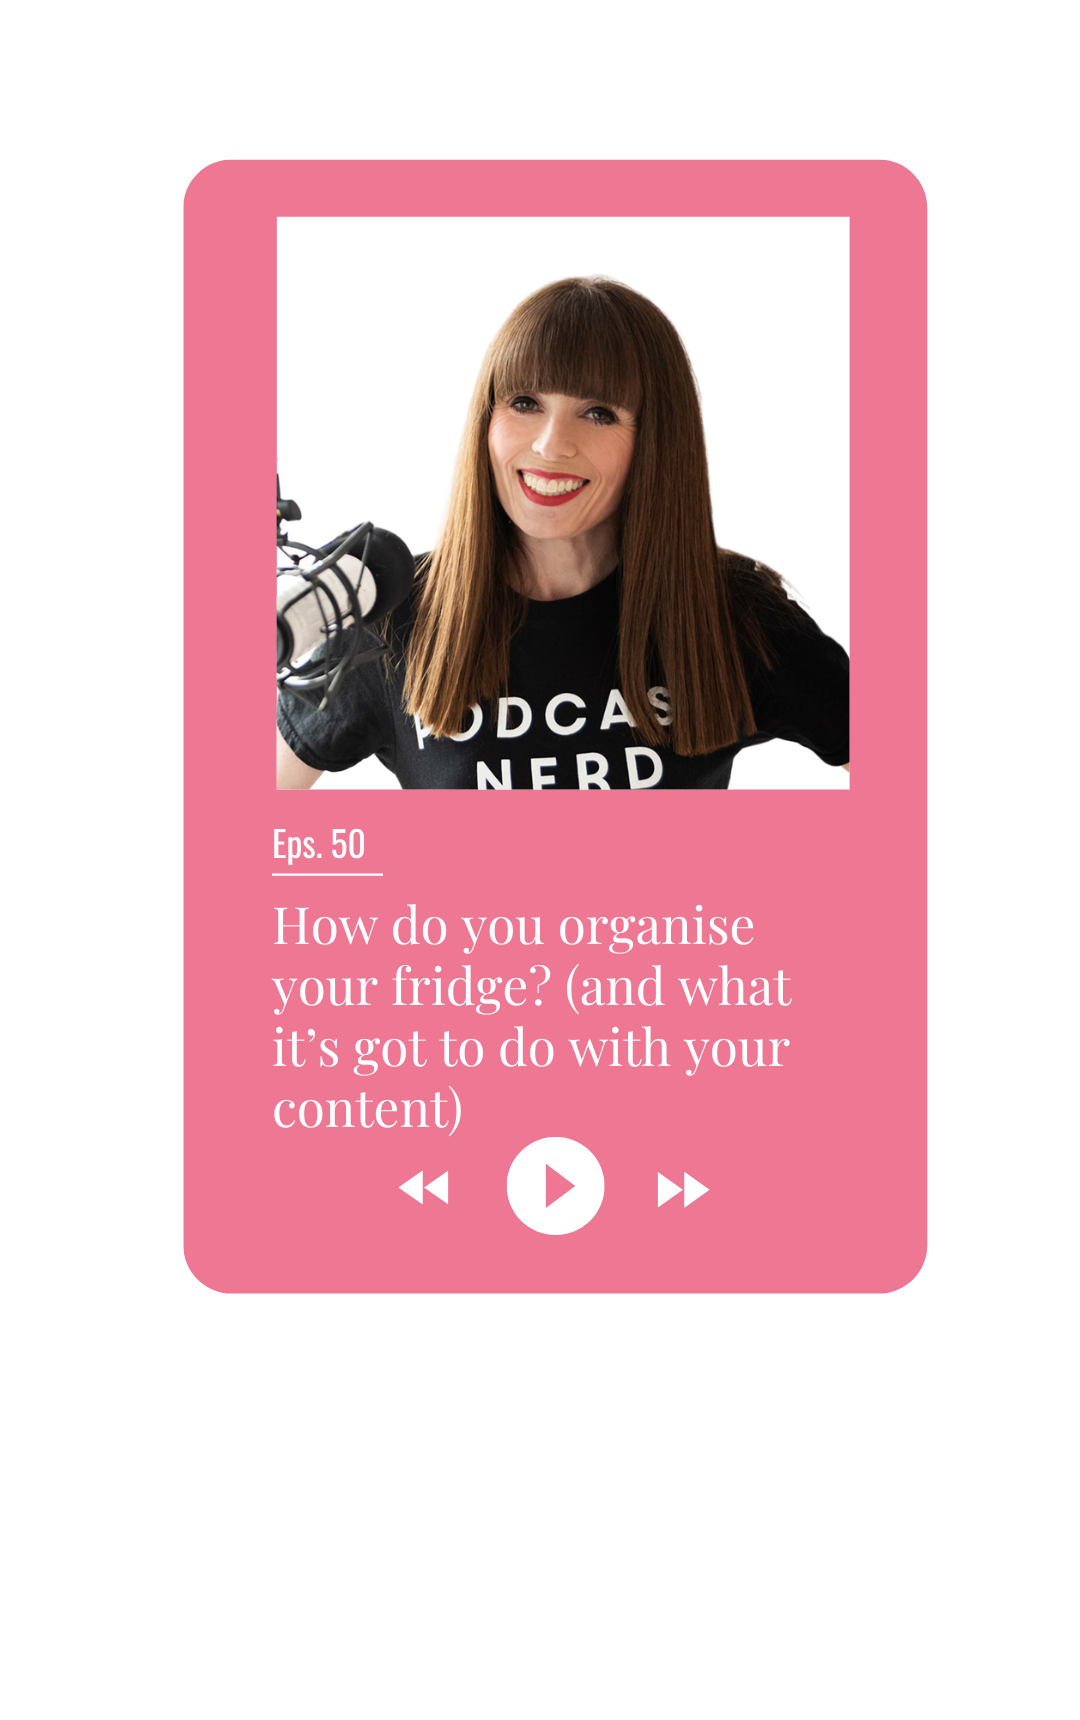 How do you organise your fridge? (and what it’s got to do with your content)